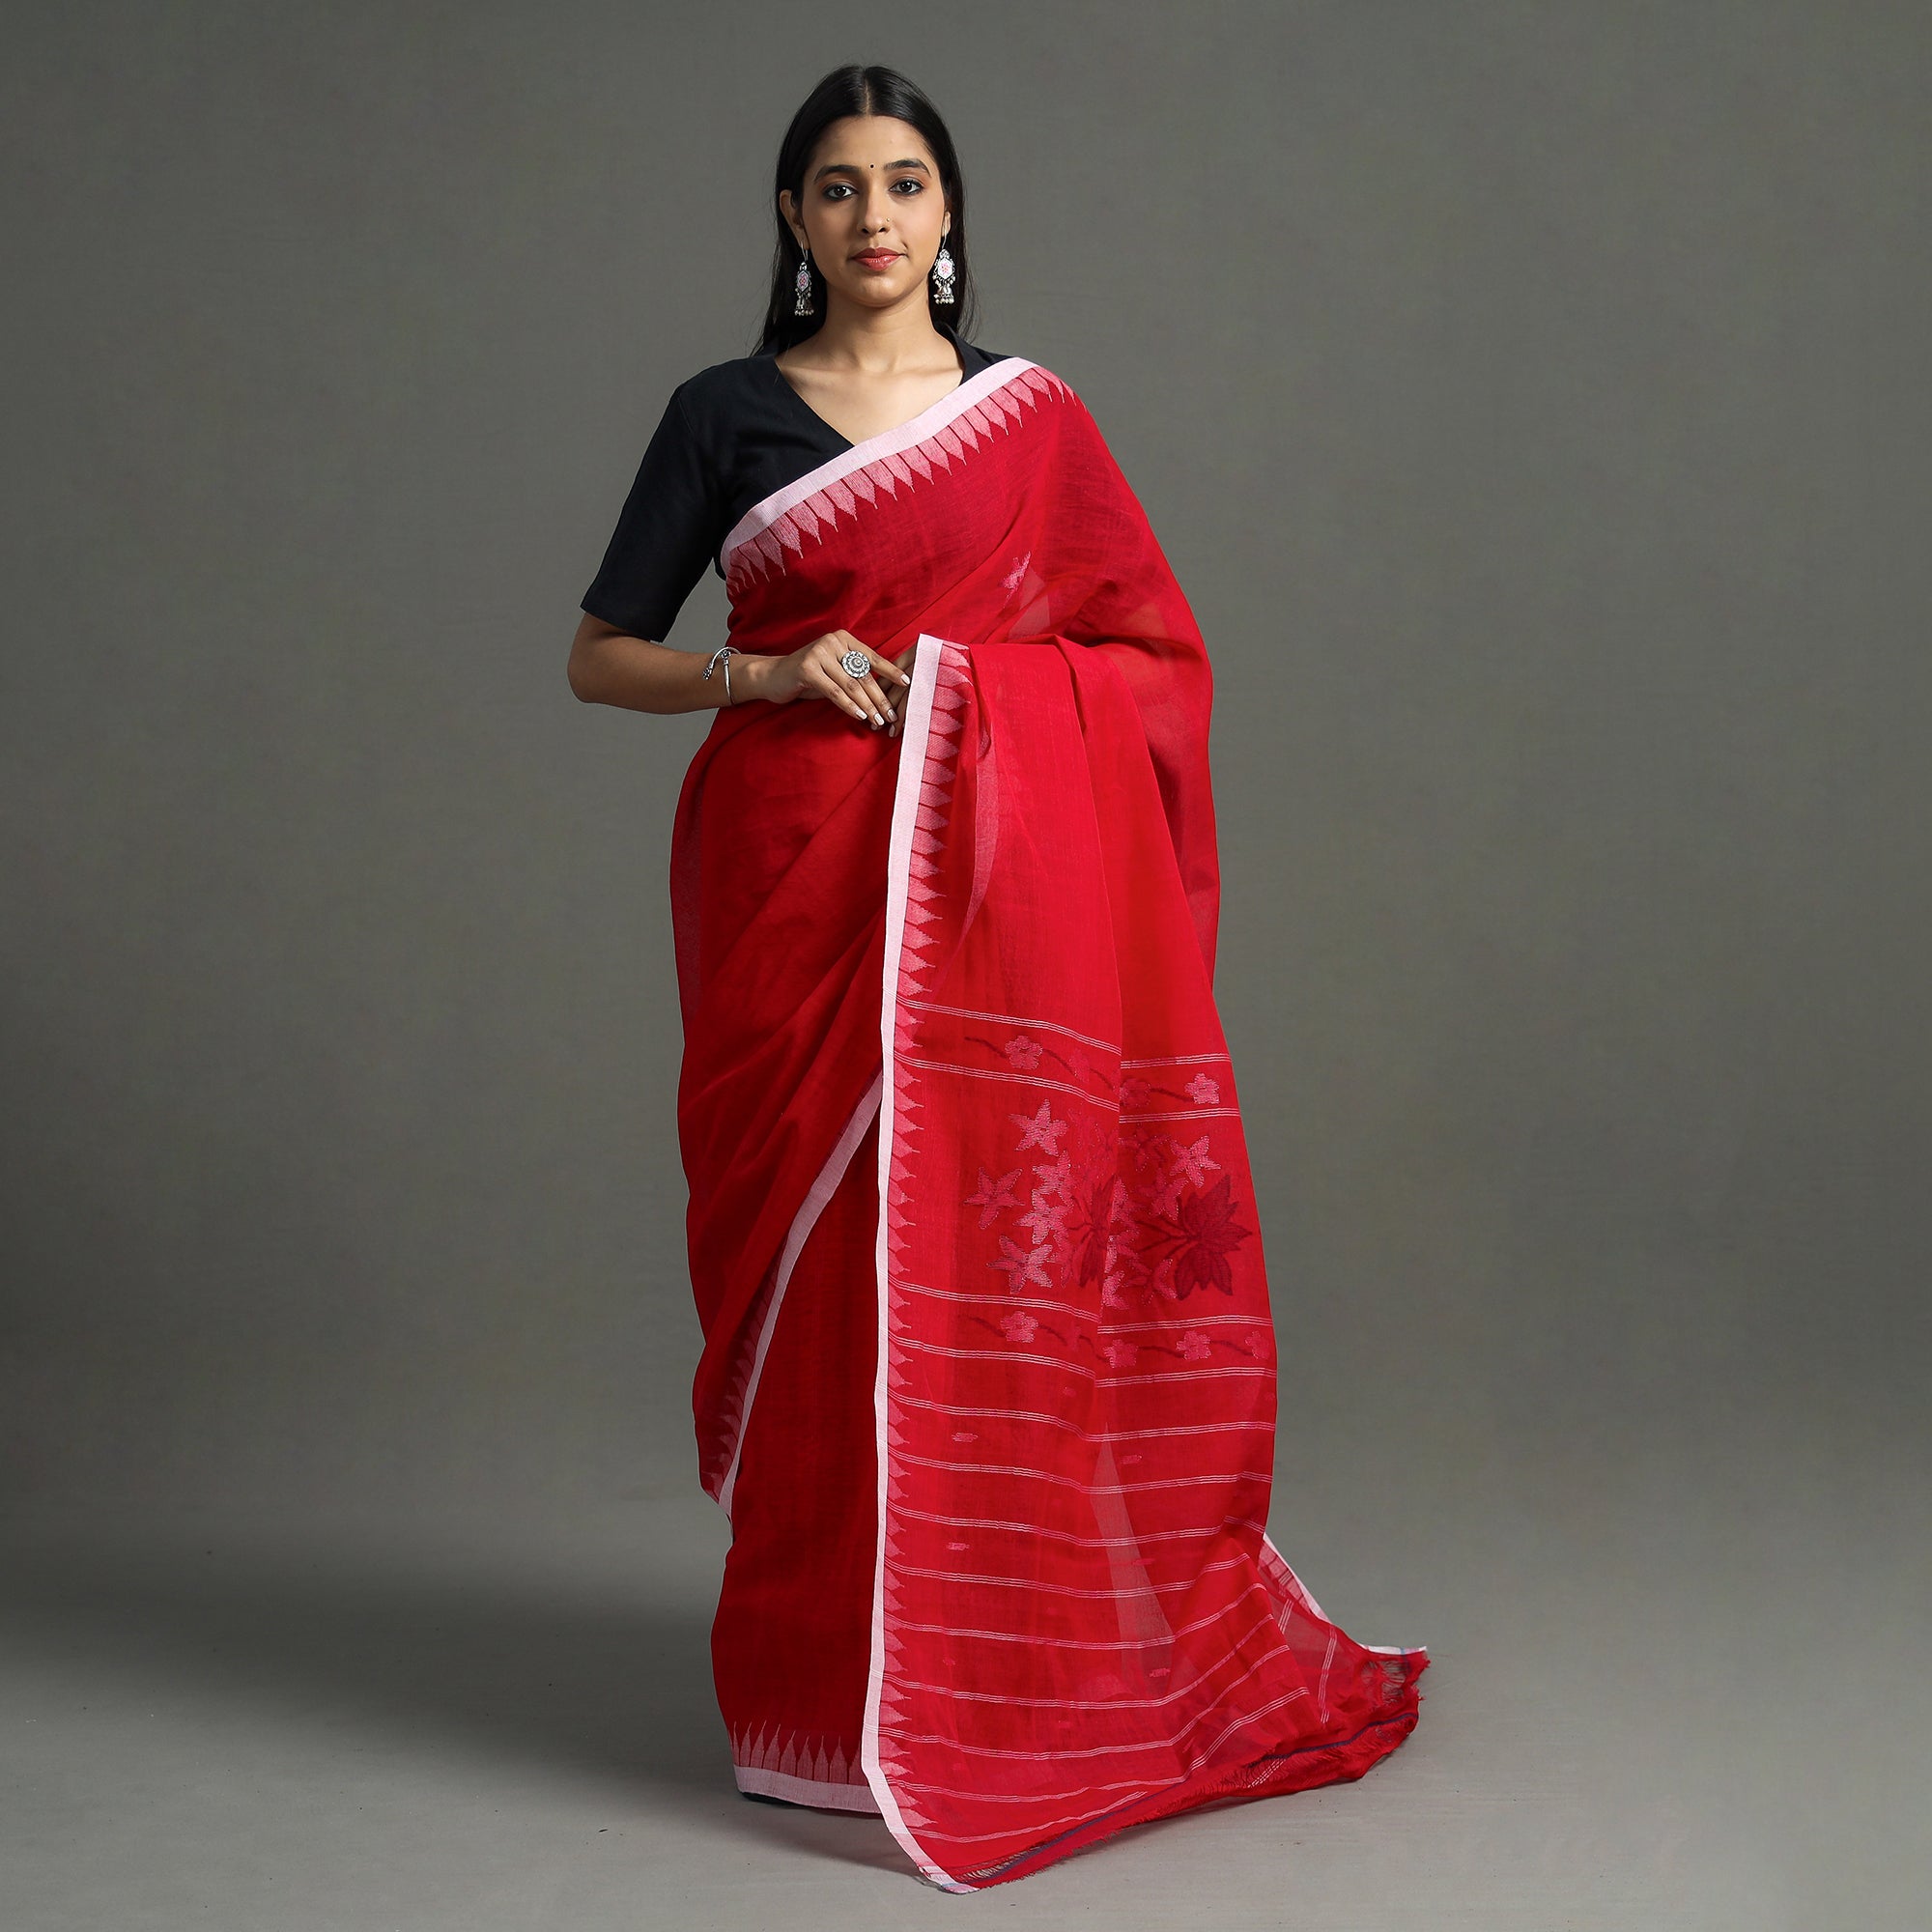 Fancy Cotton Saree in Hyderabad at best price by Sandhya Corporation Pvt  Ltd - Justdial